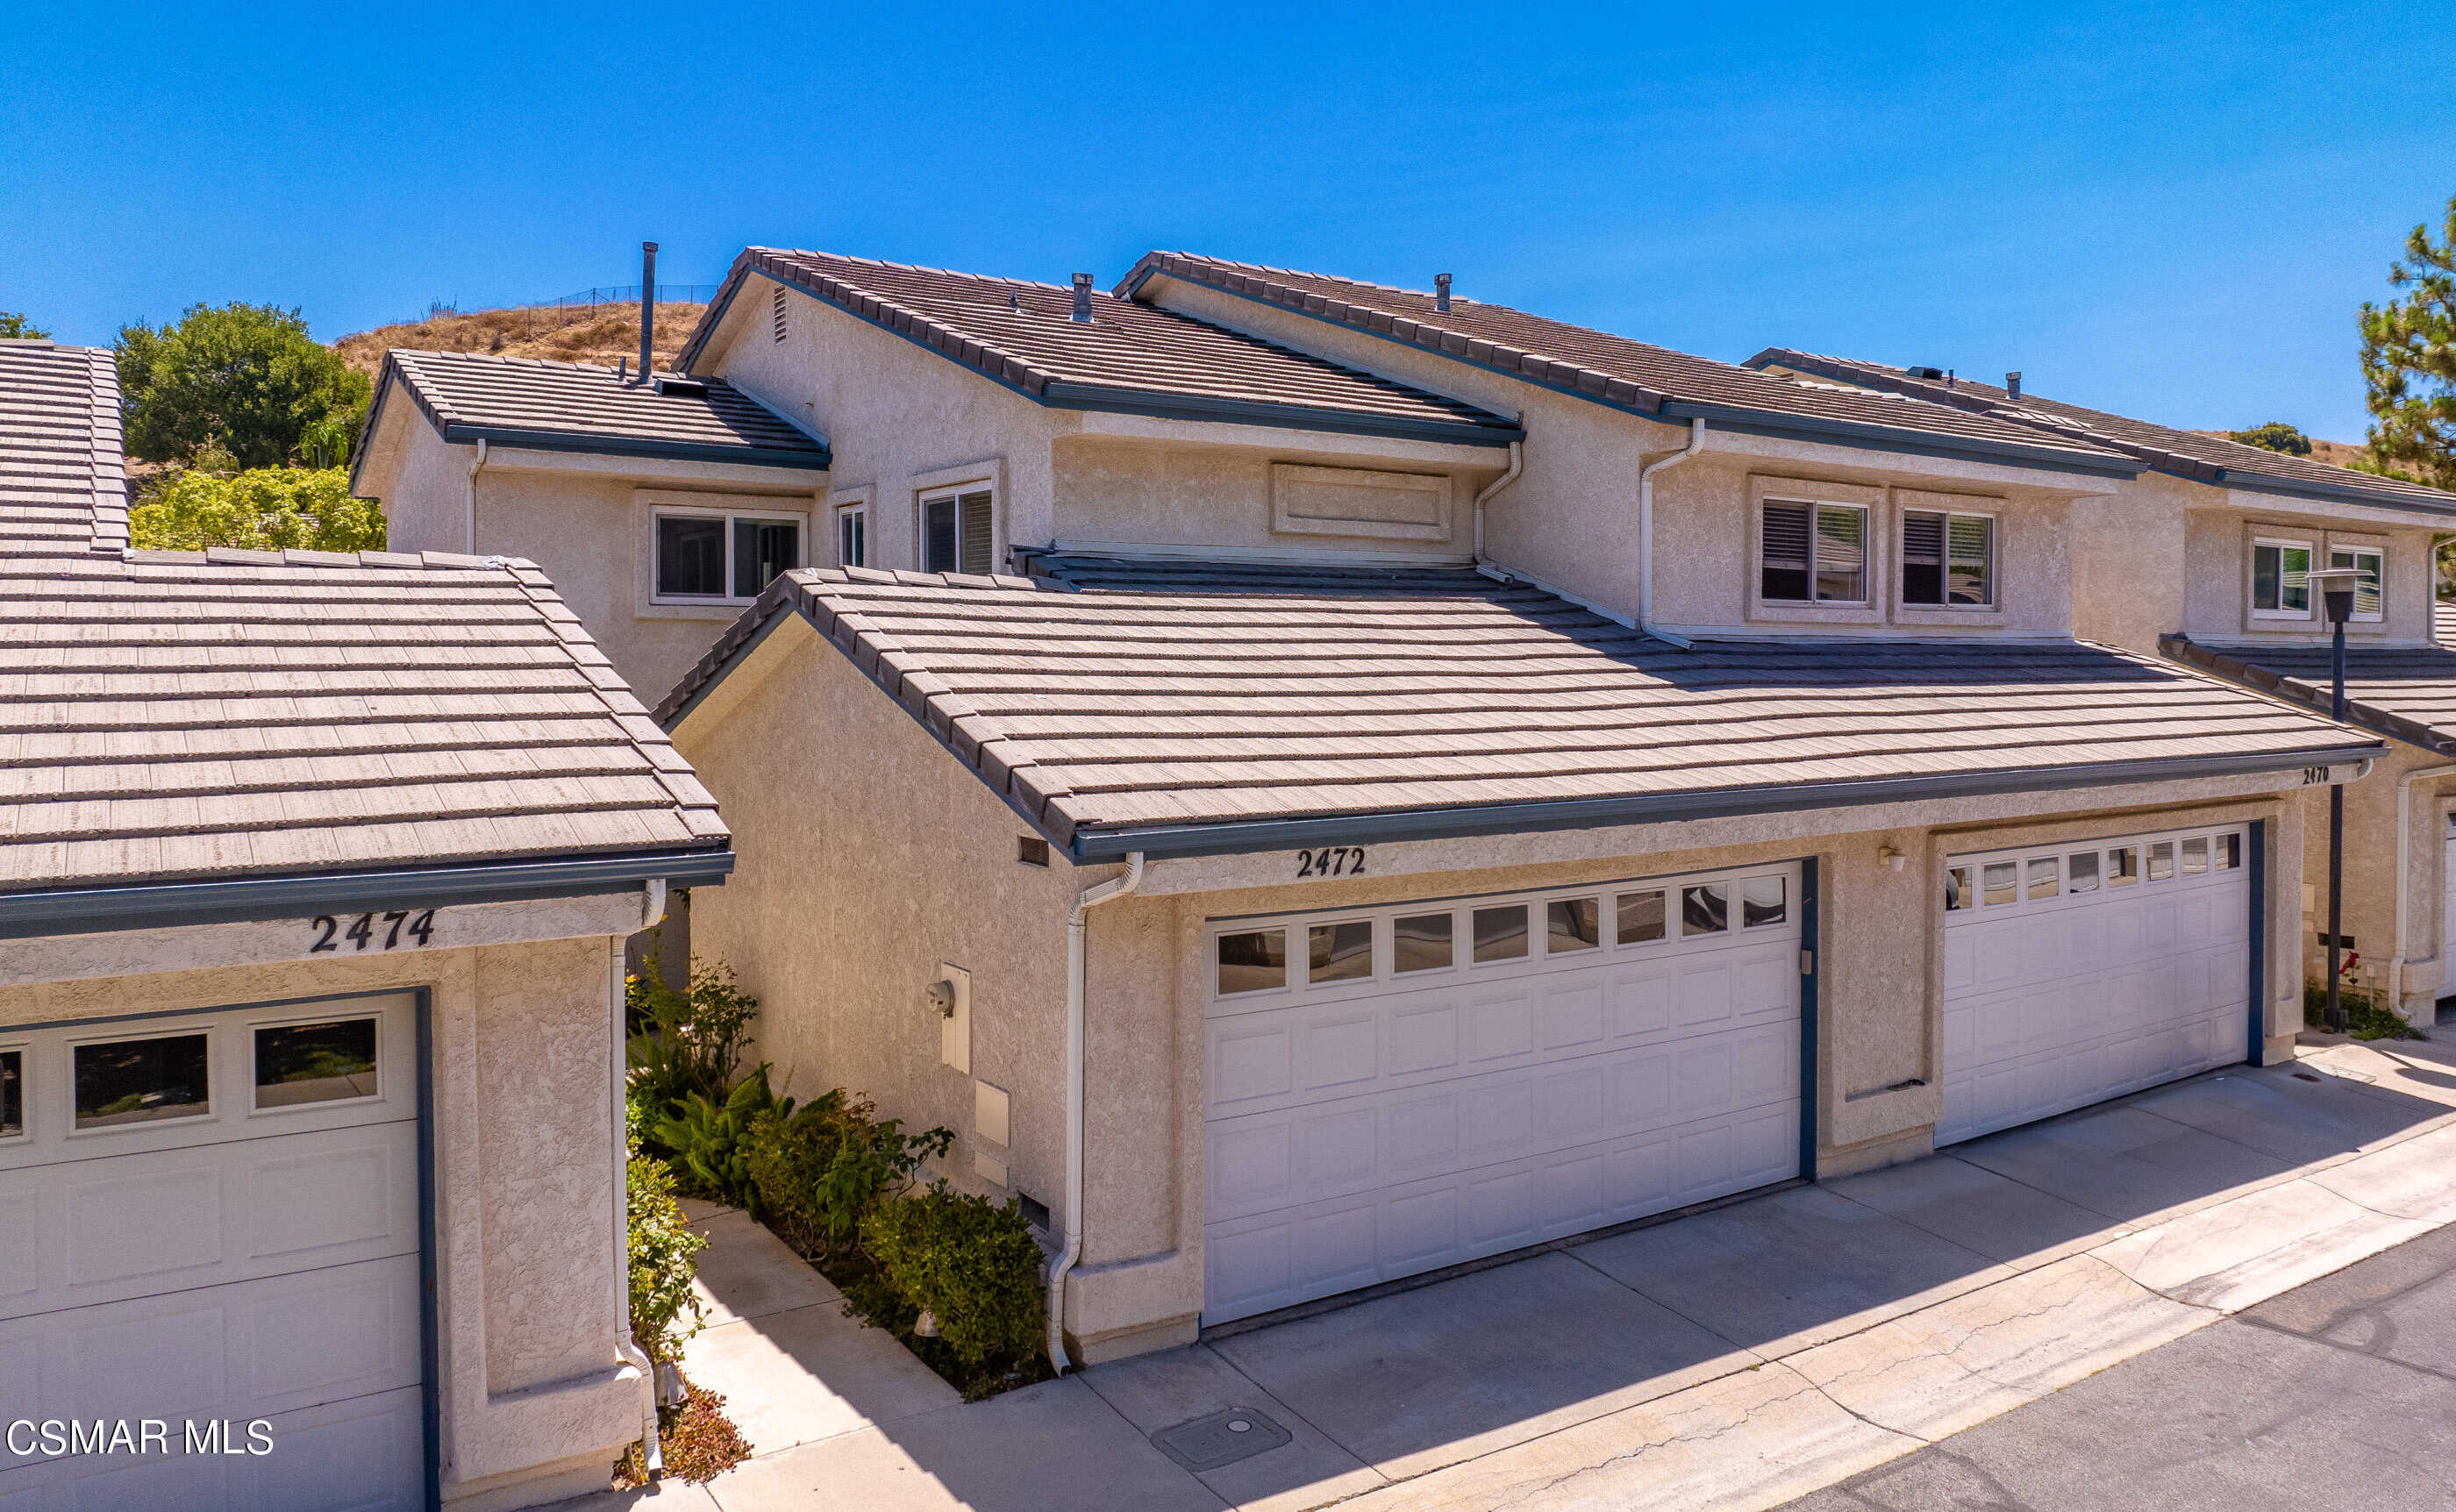 View Simi Valley, CA 93063 townhome